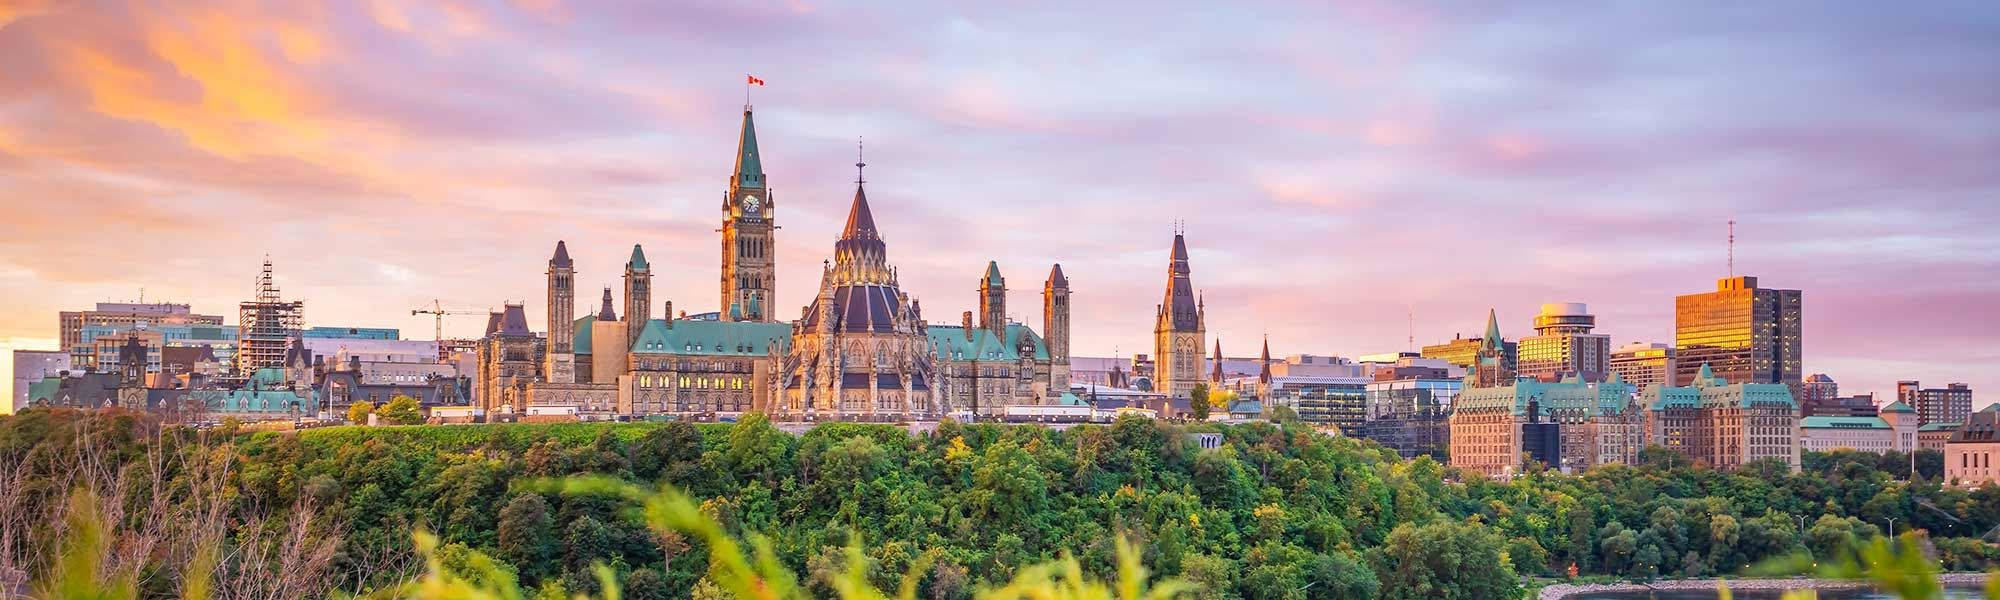 Panoramic View Of Parliament Hill In Ottawa Wallpaper